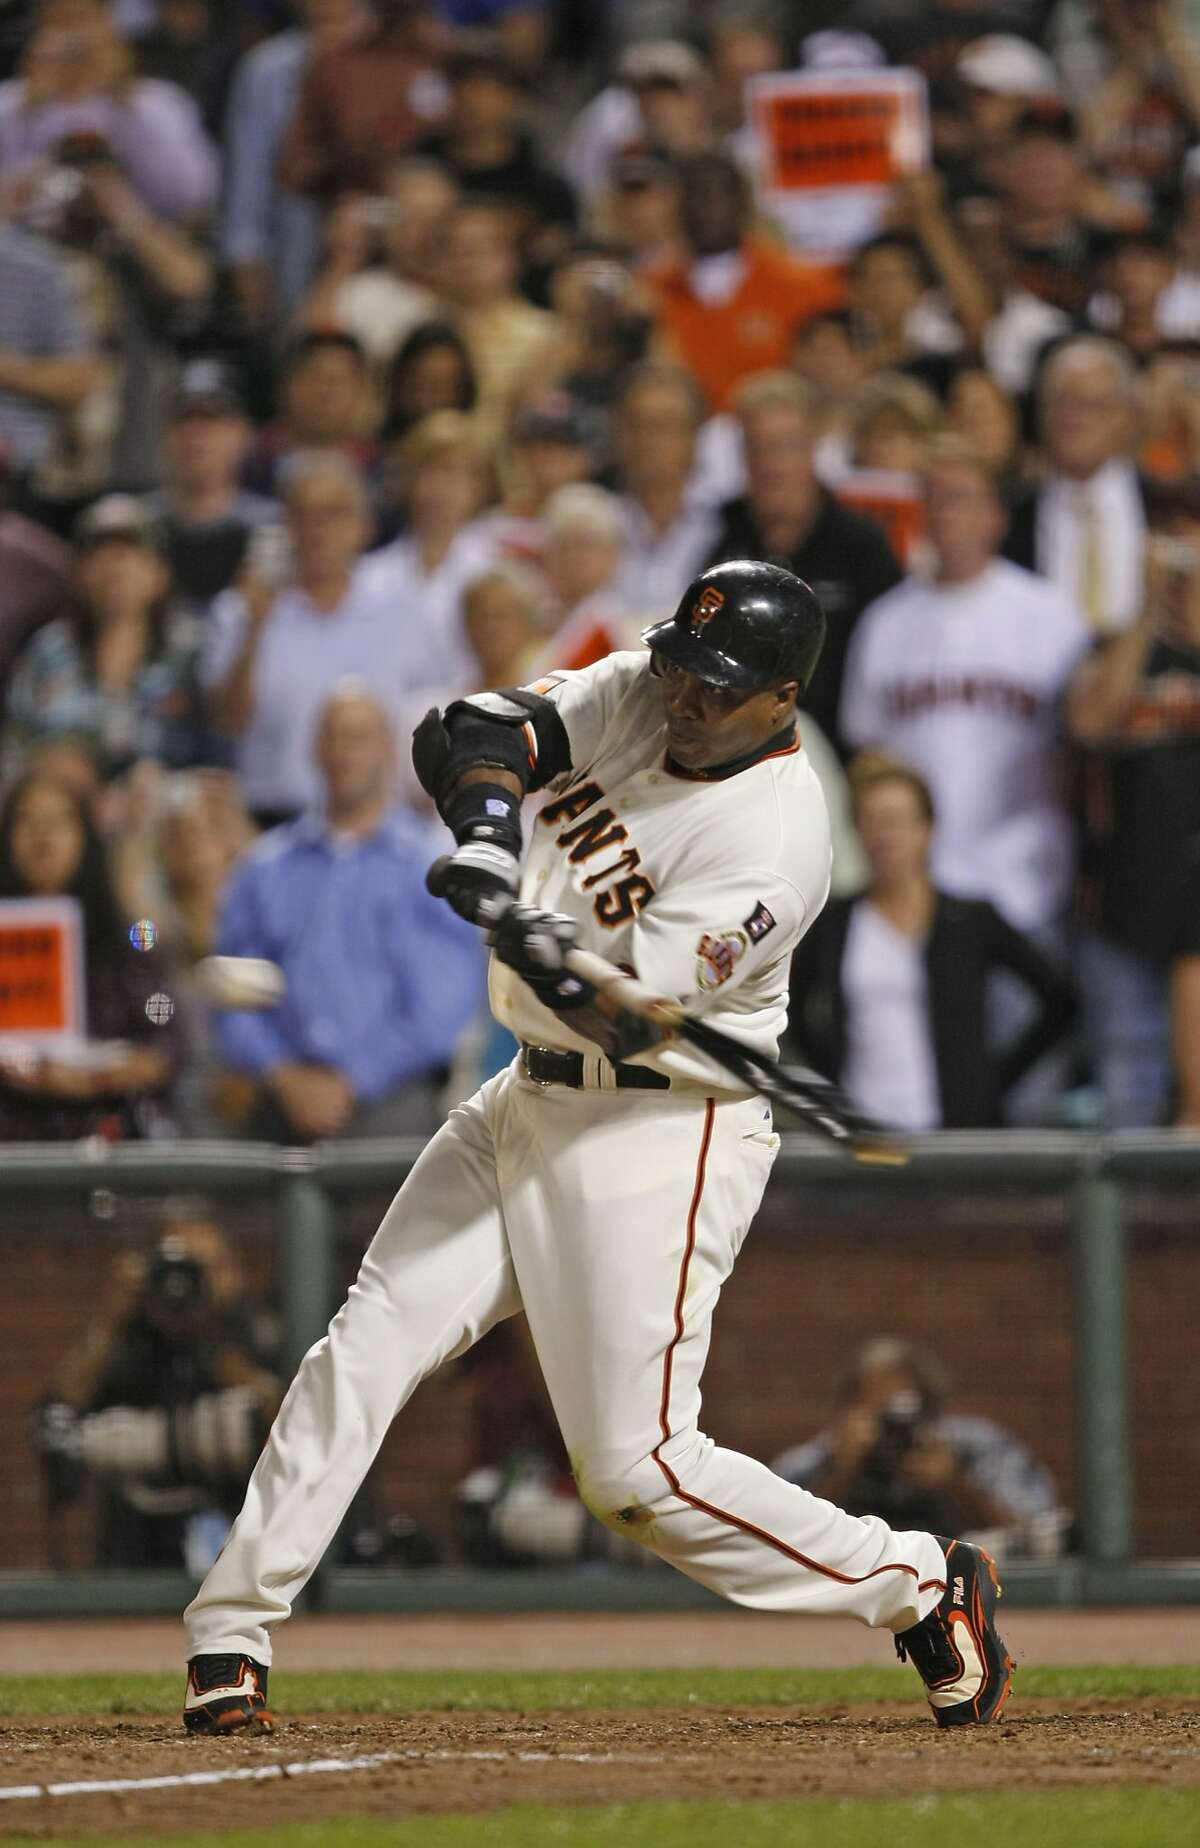 Barry Bonds takes his final at bat - a pop out - and then leaves the field for the last time in the 6th inning as he plays his final game at AT&T Park as a San Francisco Giant in game against San Diego Padres. Photographed in San Francisco on 9/26/07. Deanne Fitzmaurice / The Chronicle